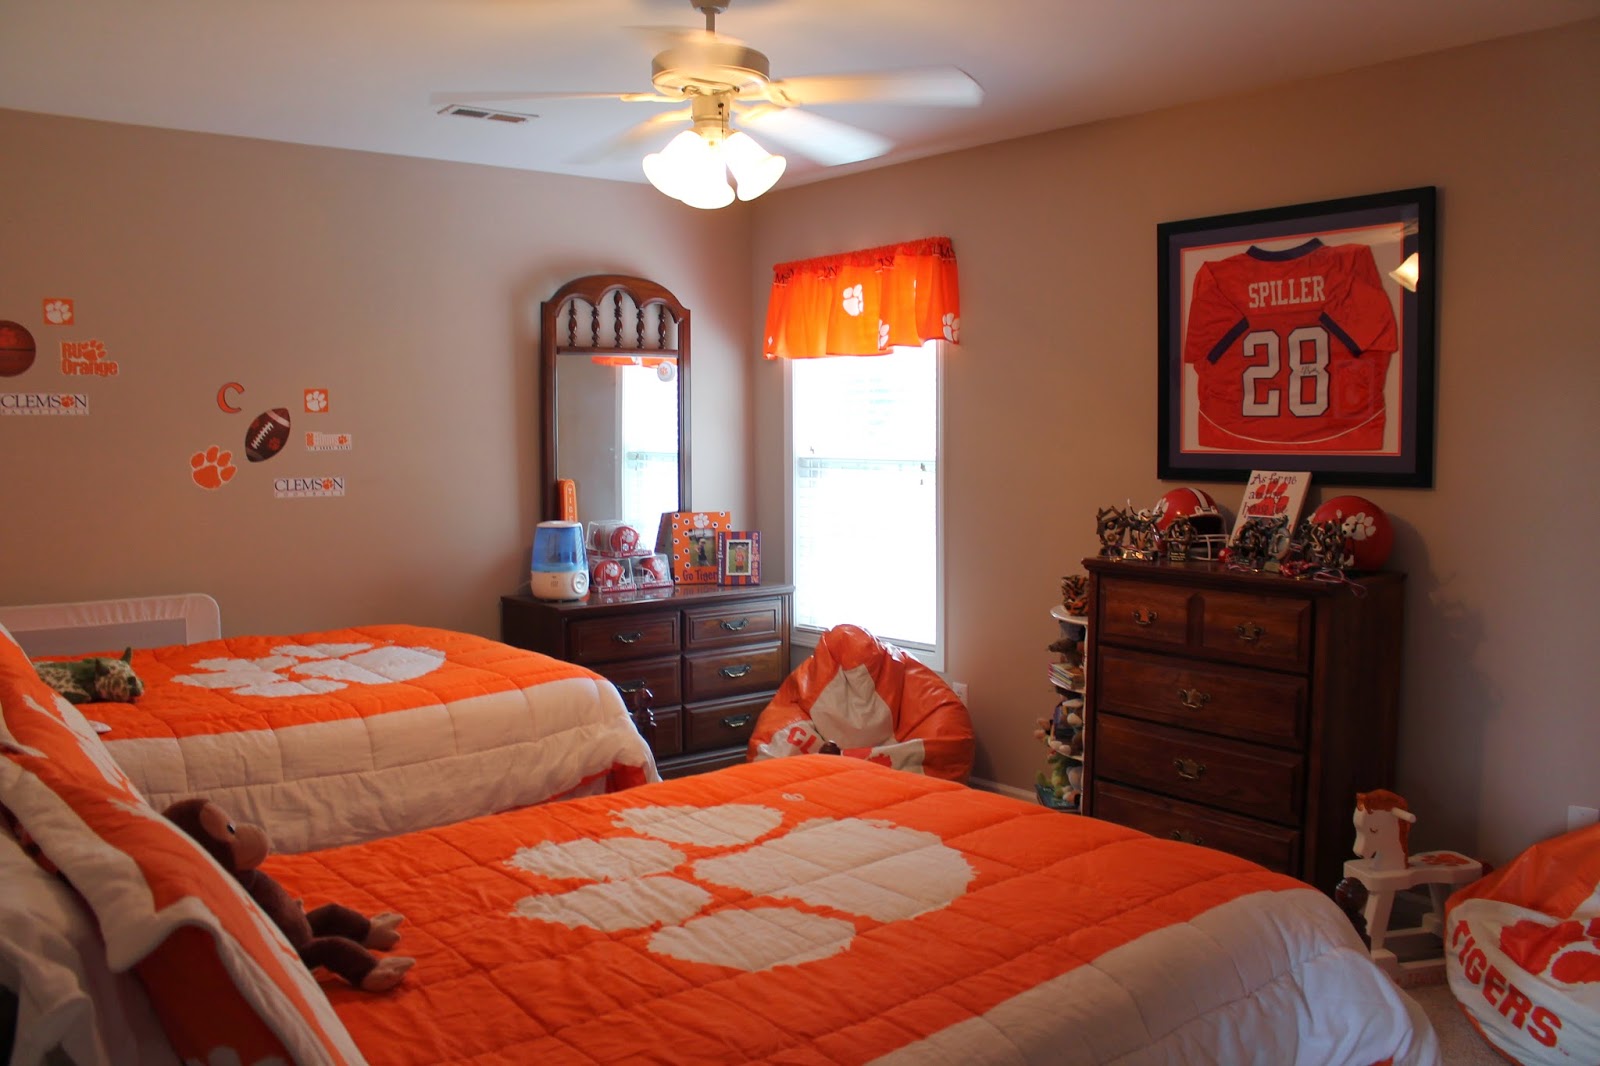 Home Tour Tuesday Our Clemson Room The Things I'm Learning